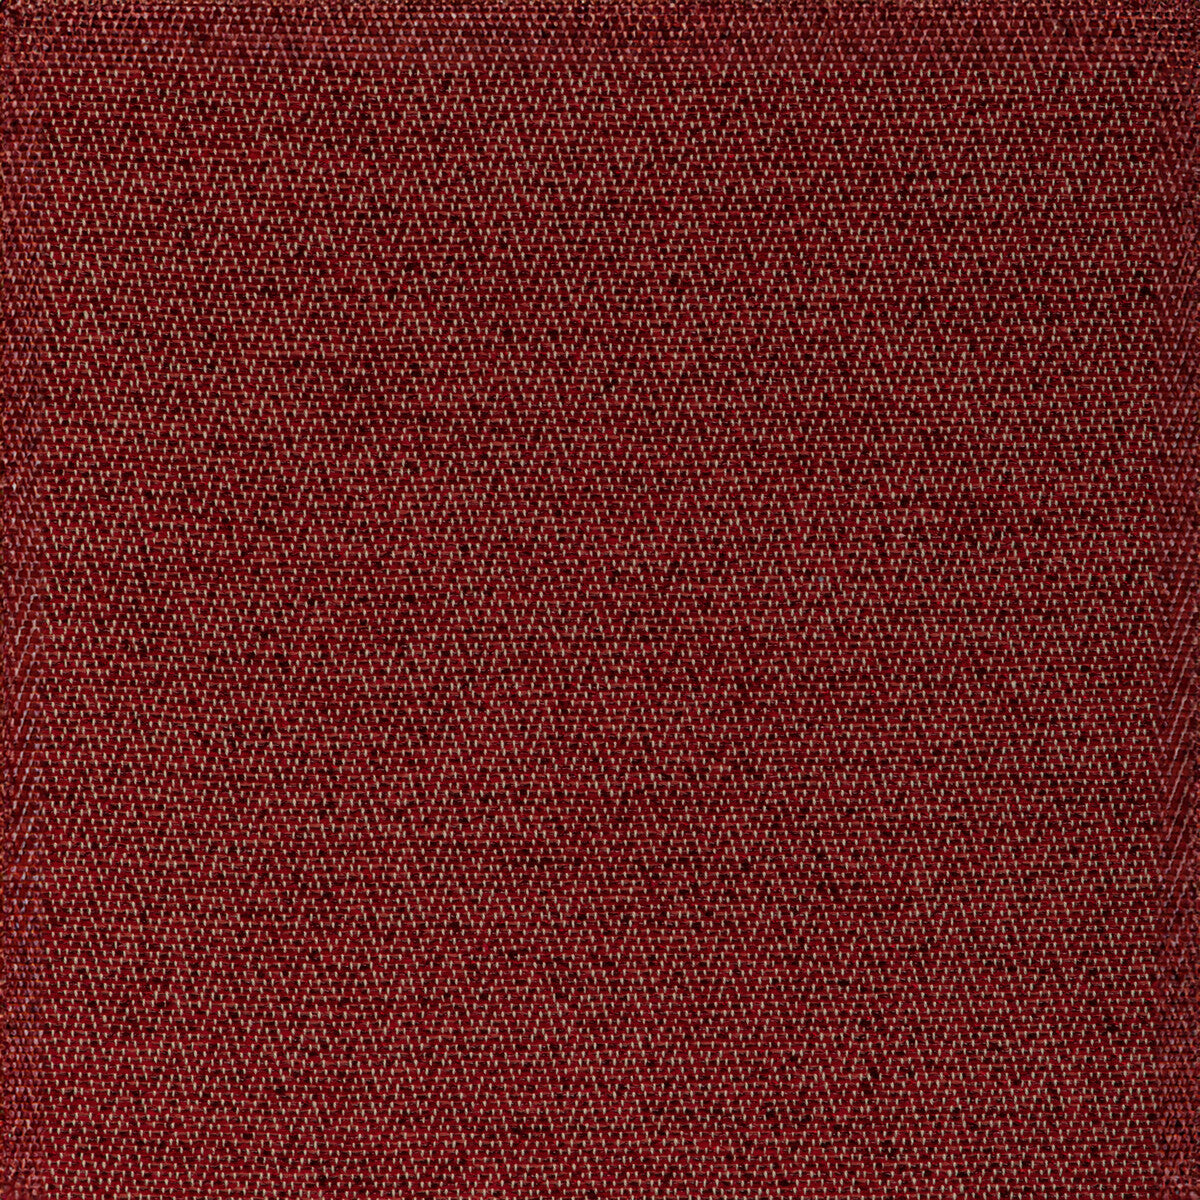 Beauvoir Texture fabric in red color - pattern 8023153.19.0 - by Brunschwig &amp; Fils in the Chambery Textures IV collection